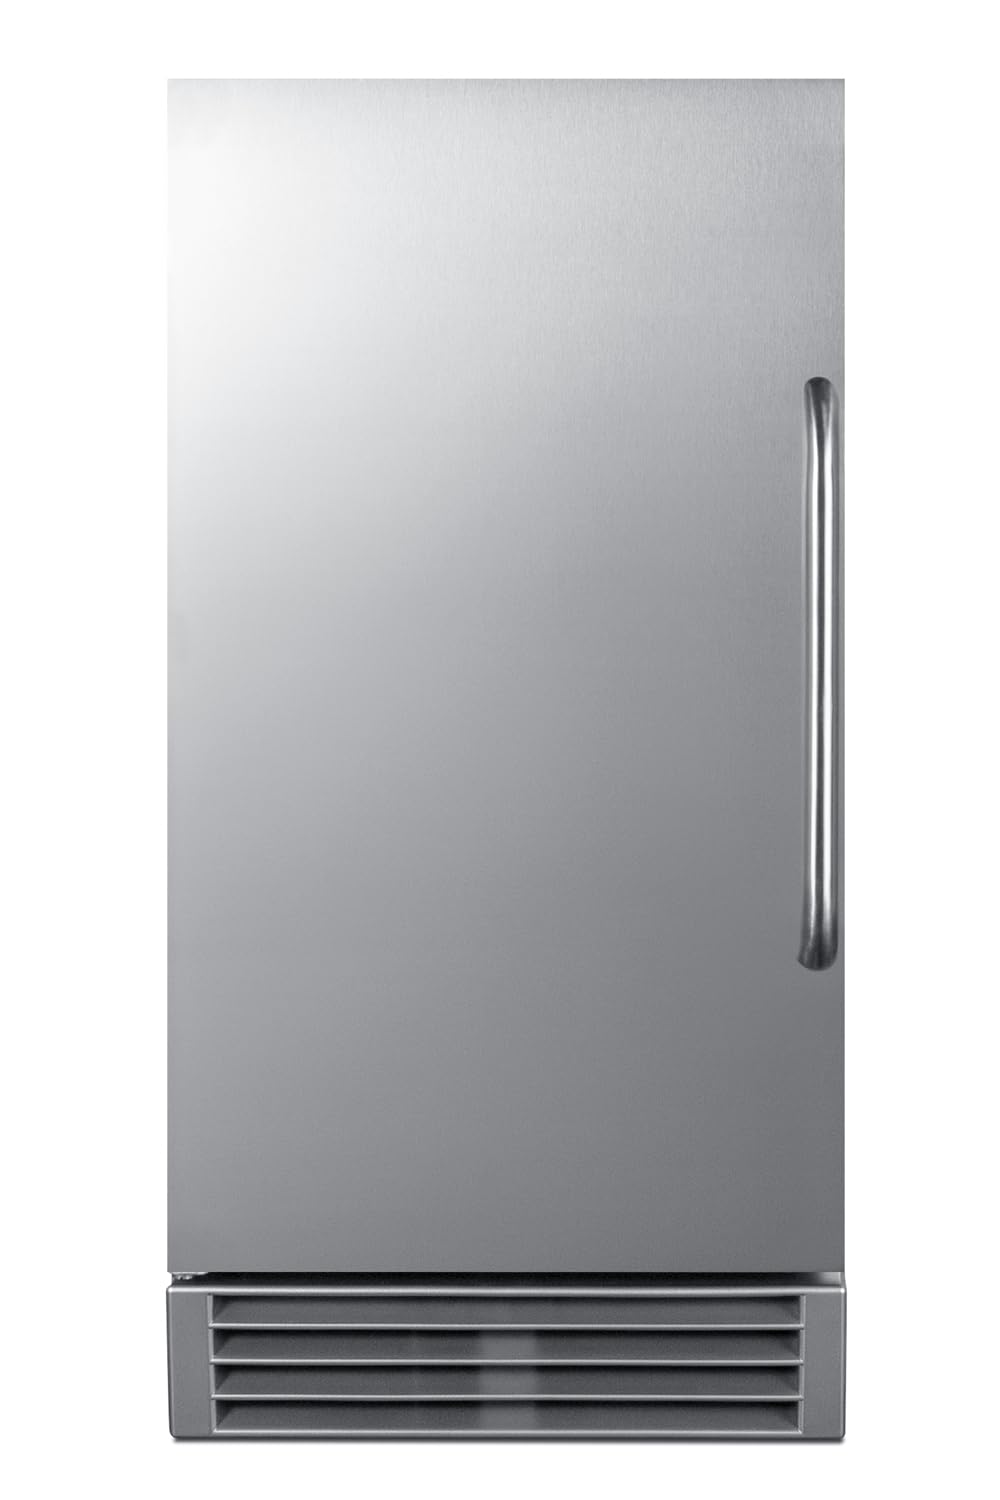 Summit Appliance BIM47OS Built-in Icemaker, Weatherproof Design for Outdoor Use, 14.5" Wide, 50 lb Production Capacity, Built-in Pump, Air Cooled, 115v